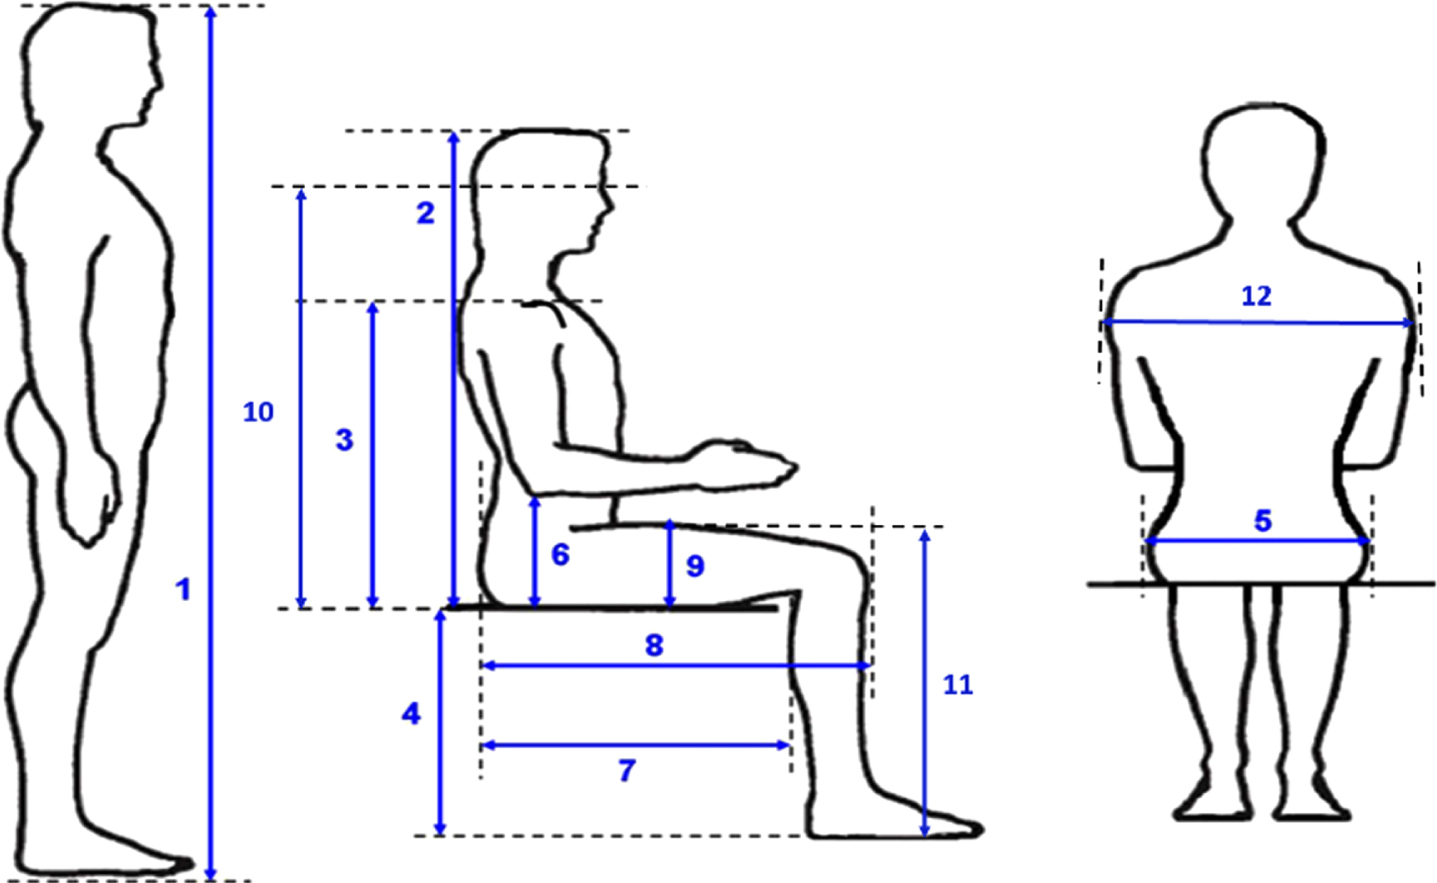 Anthropometric measurements: 1. Body stature, 2. Sitting height erected, 3. Shoulder height, 4. Popliteal height, 5. Hip breadth, 6. Elbow height, 7. Buttock-popliteal length, 8. Buttock-knee length, 9. Thigh clearance, 10 Eye height, 11. Knee height, 12. Shoulder breadth.